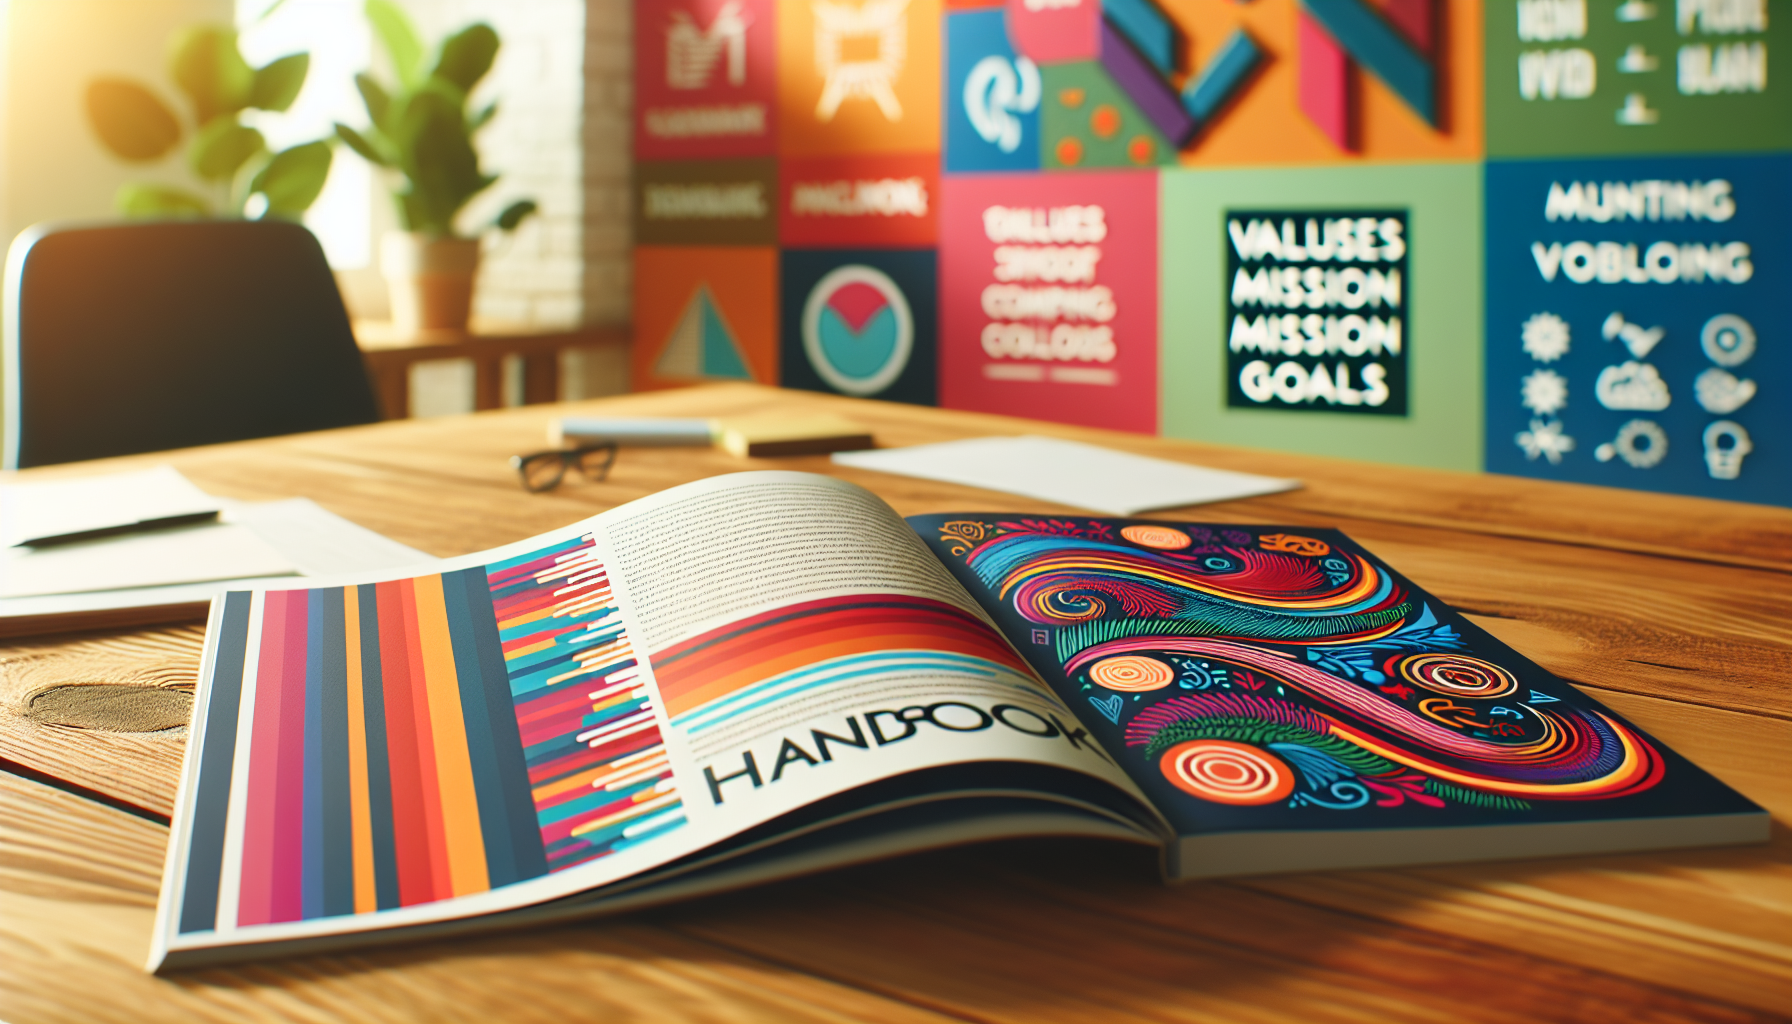 Illustration of a handbook with company branding and logo